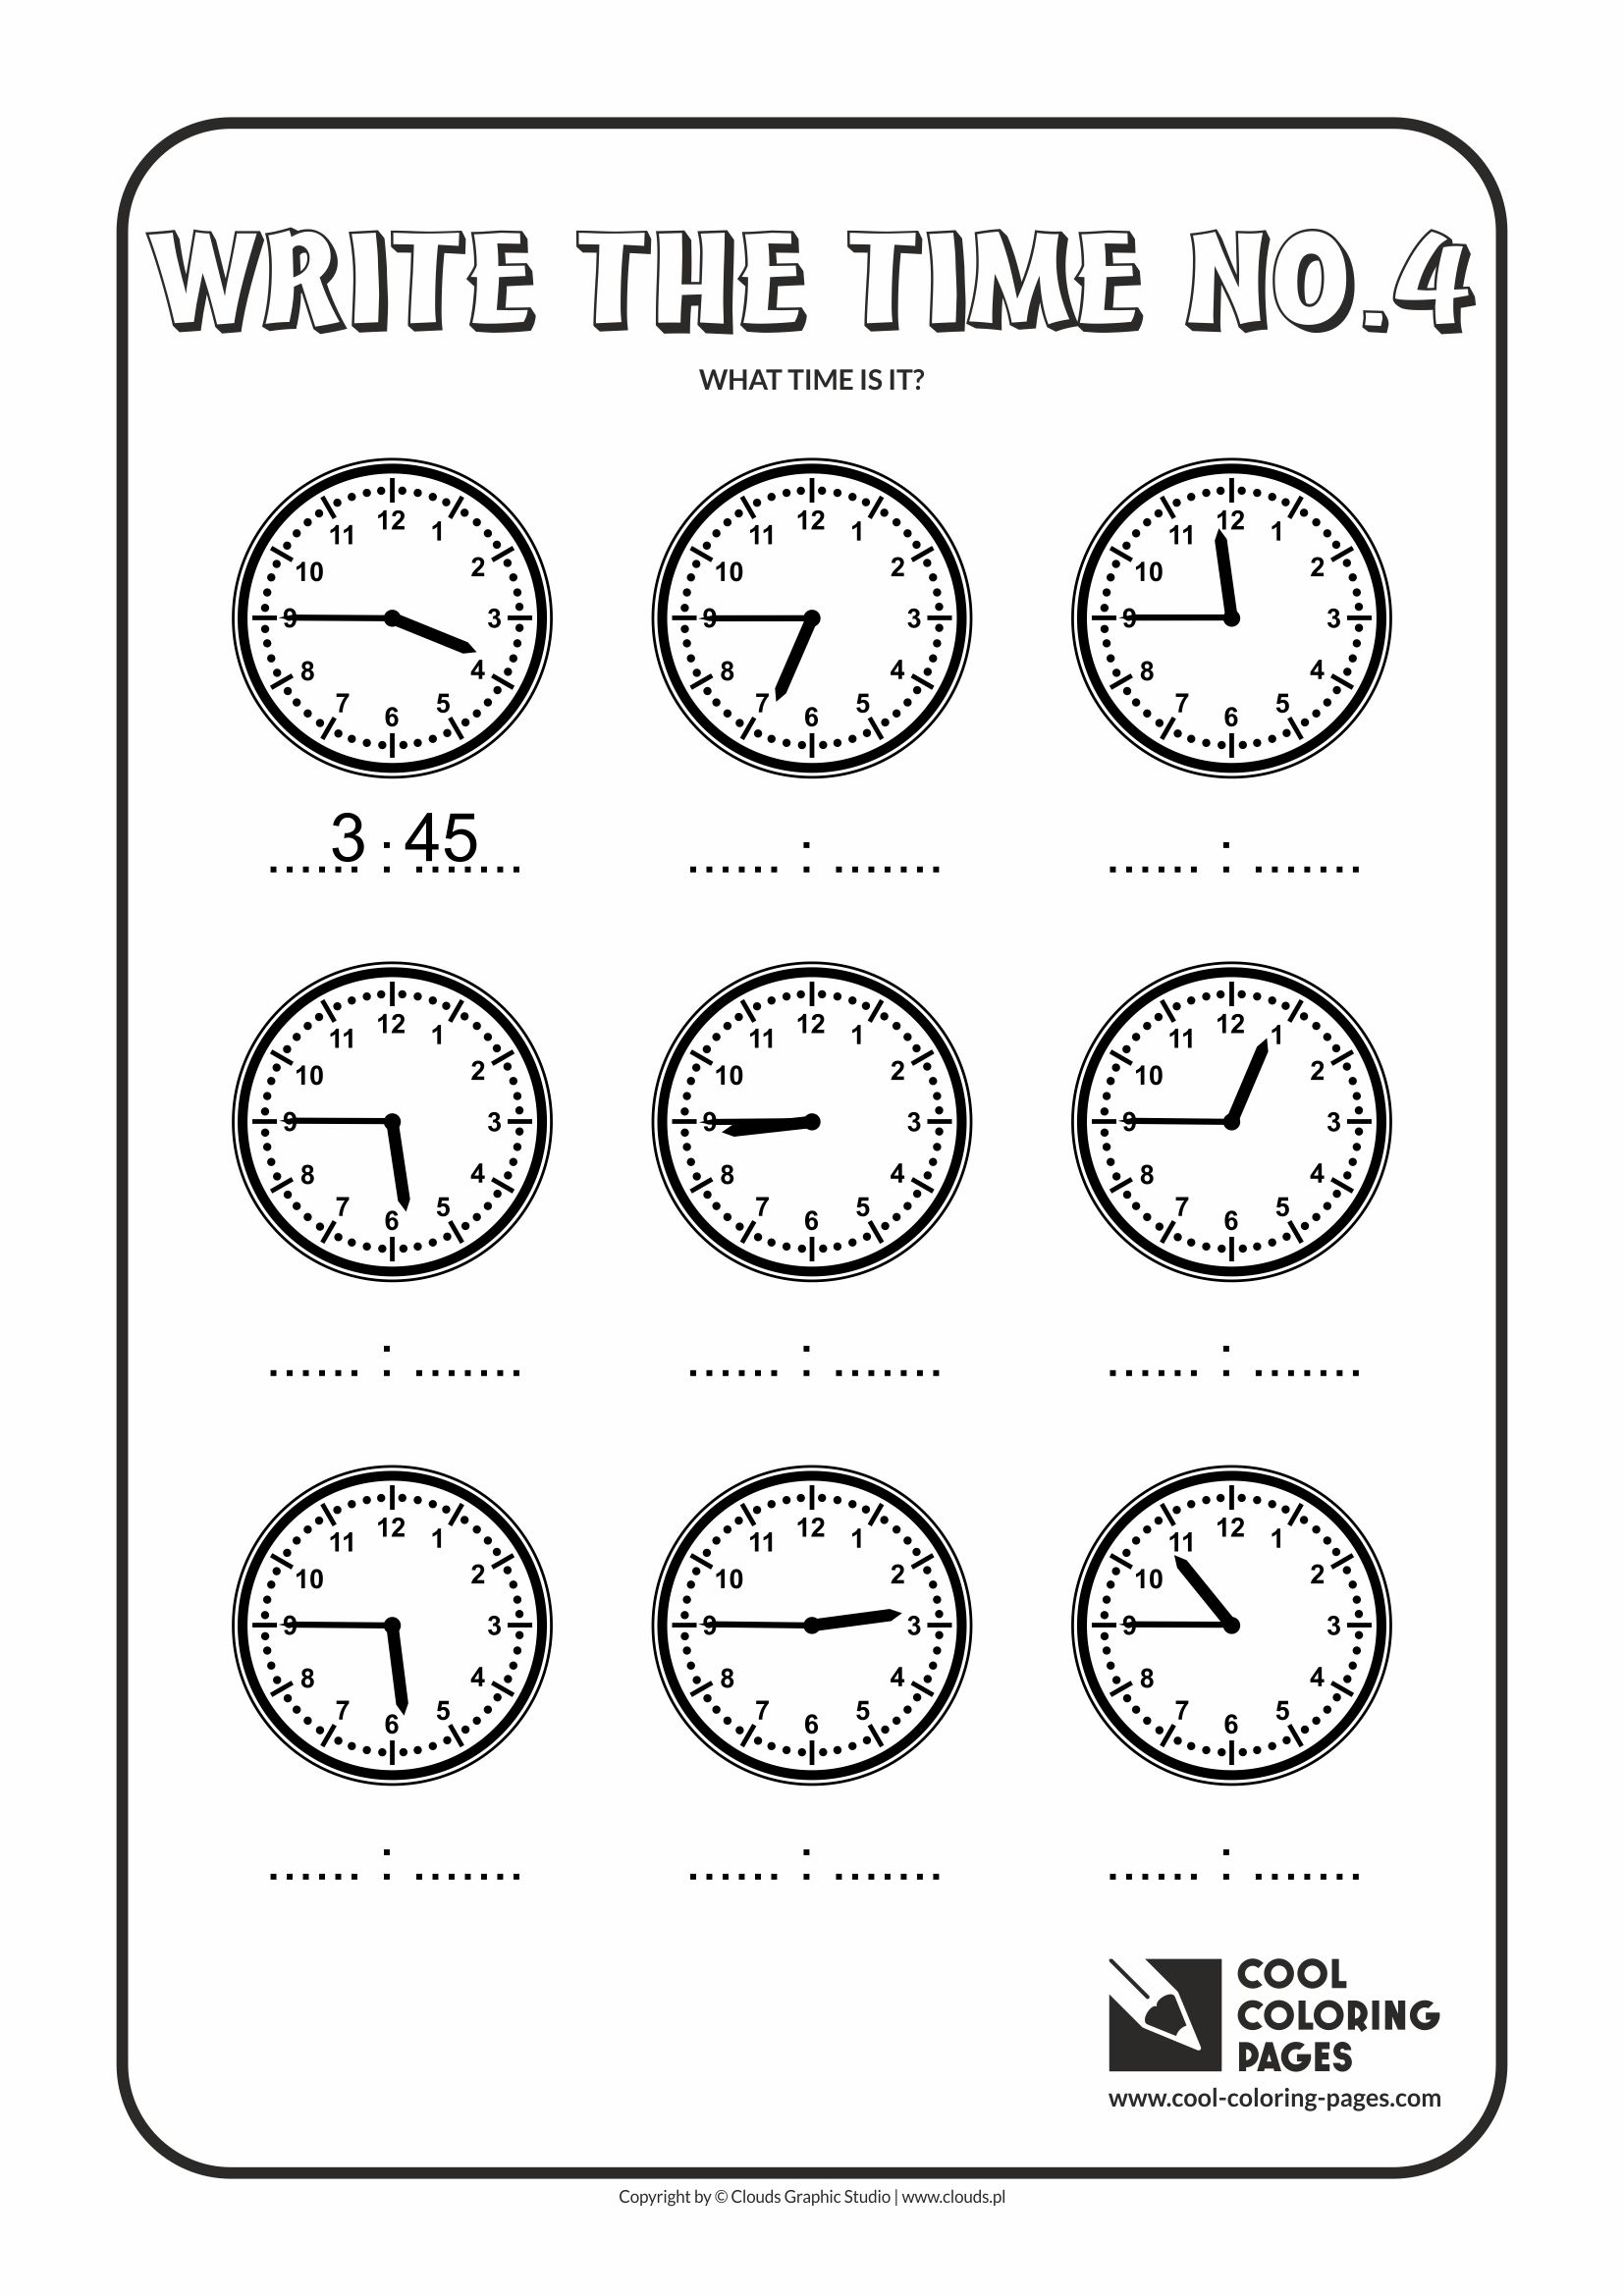 Cool Coloring Pages - Time / Write the time no.4